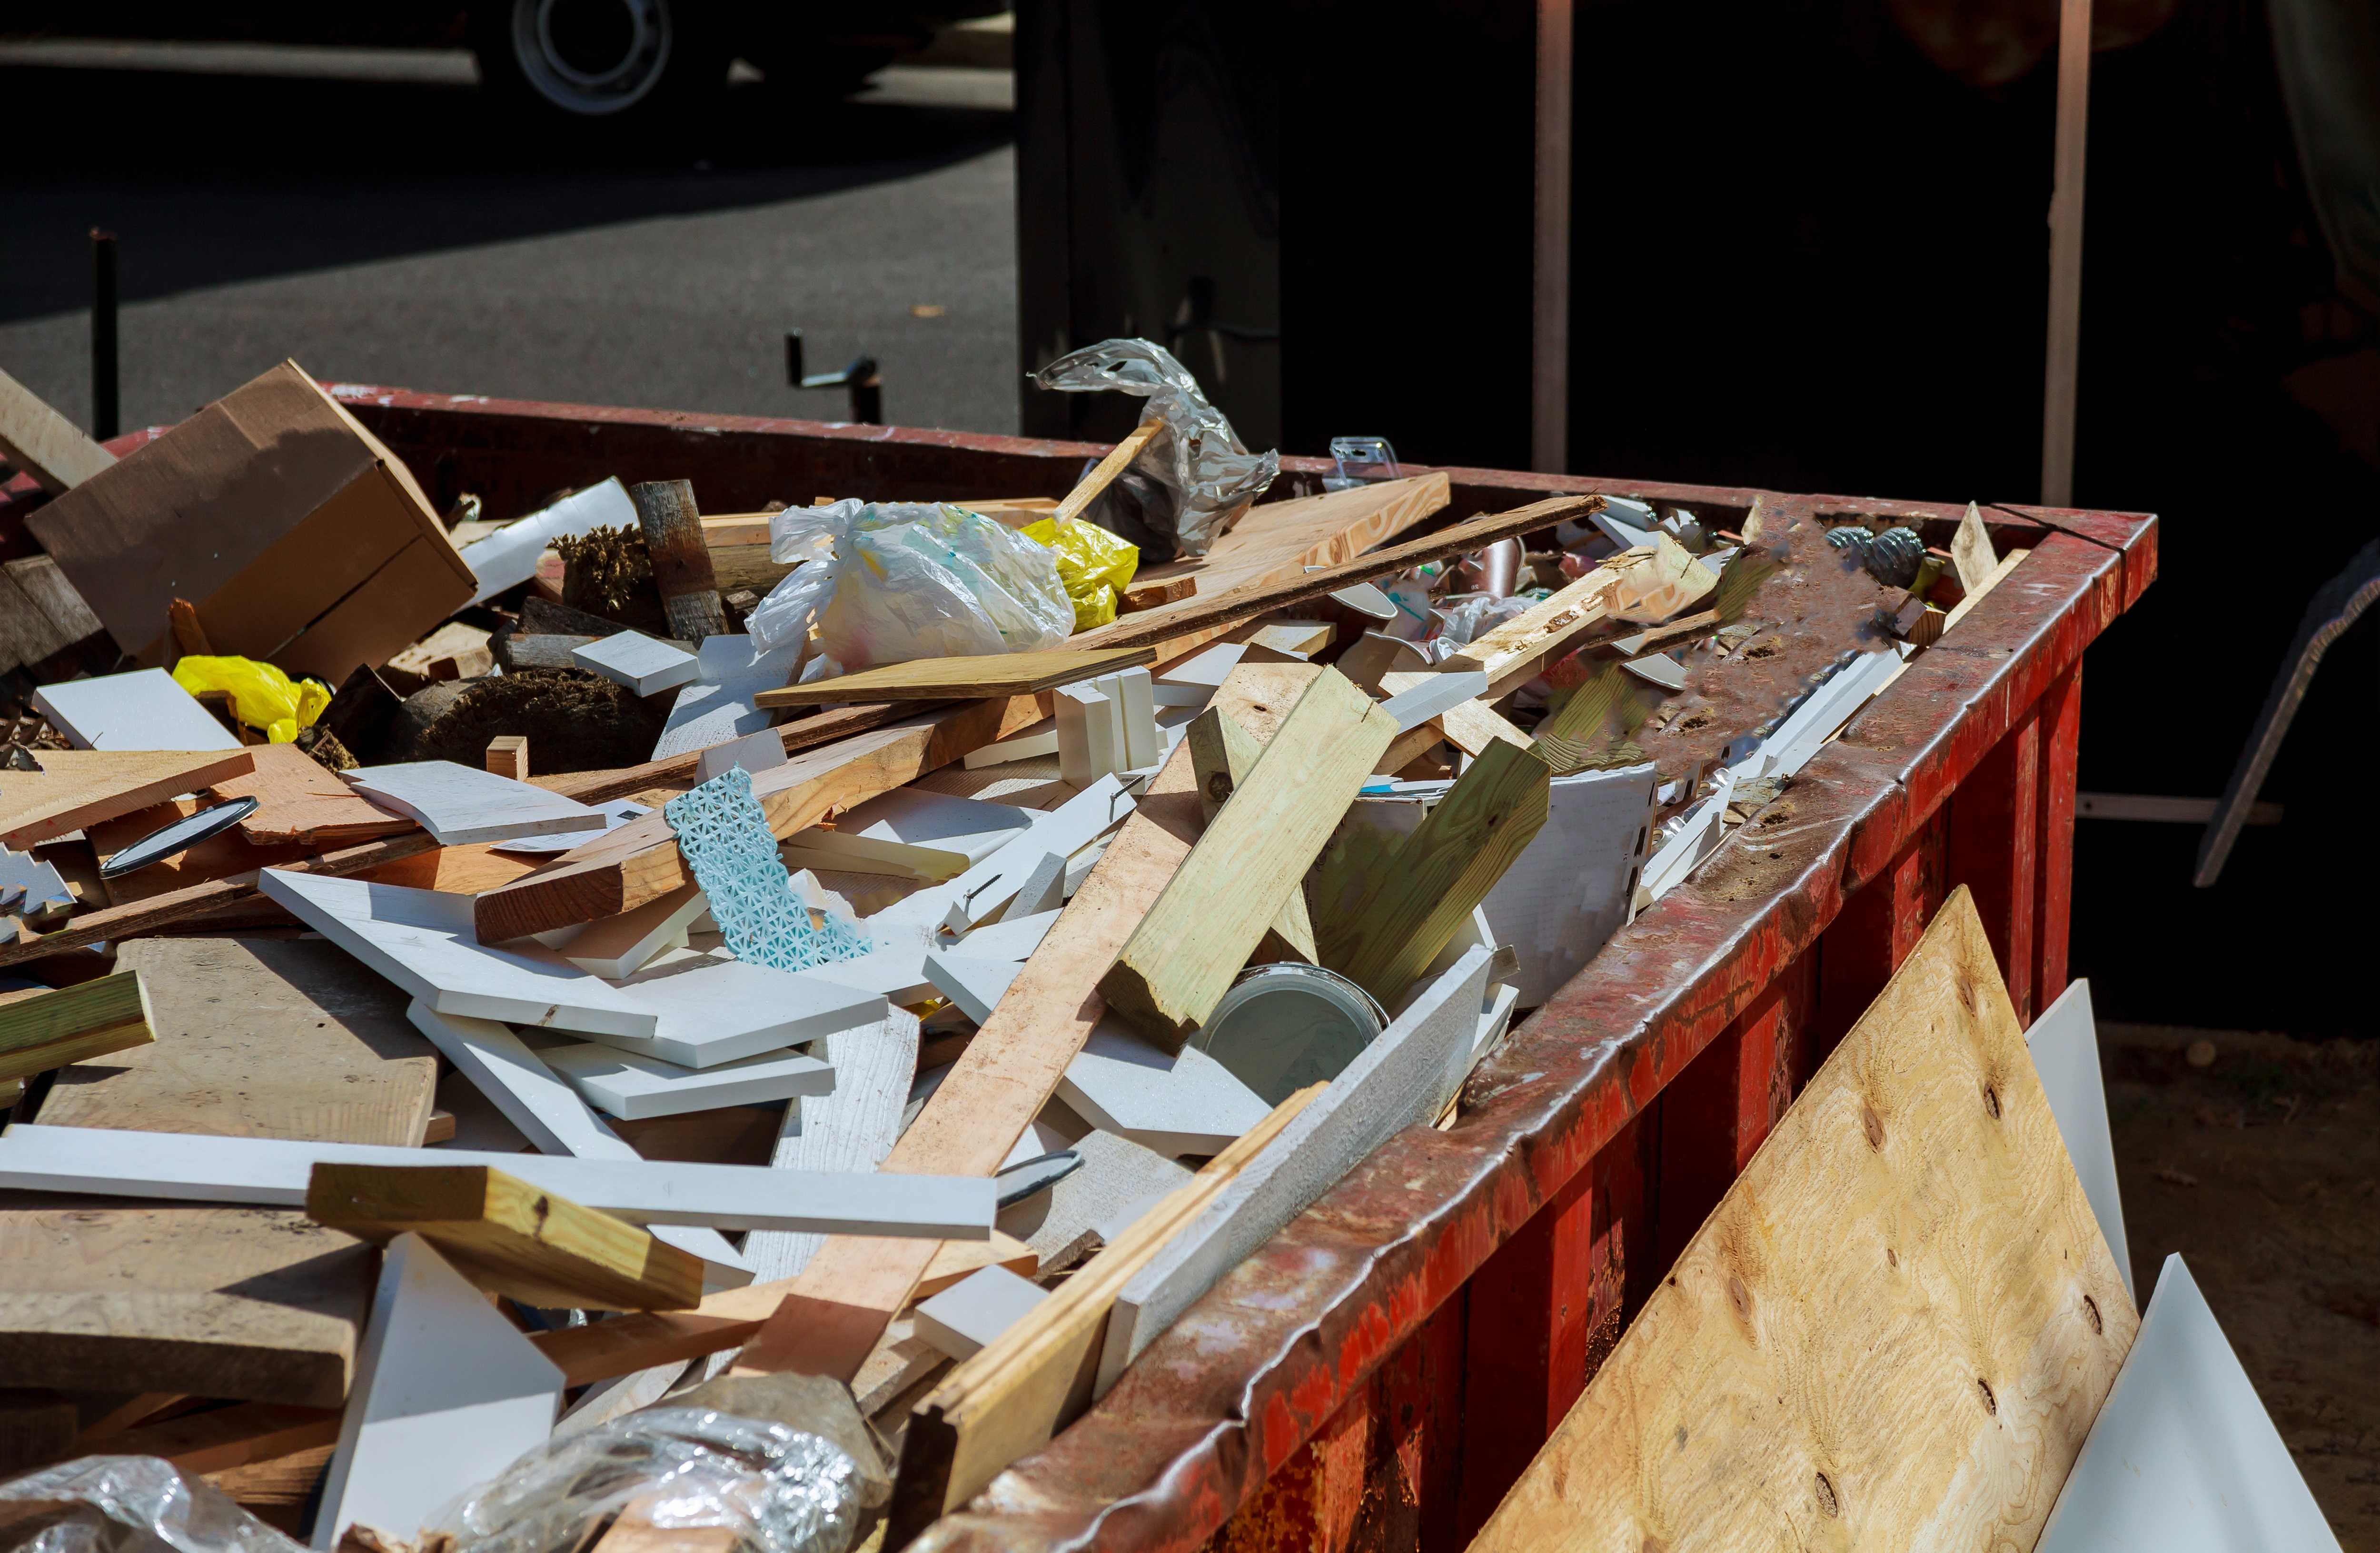 Local Skip Hire Services in Auckley